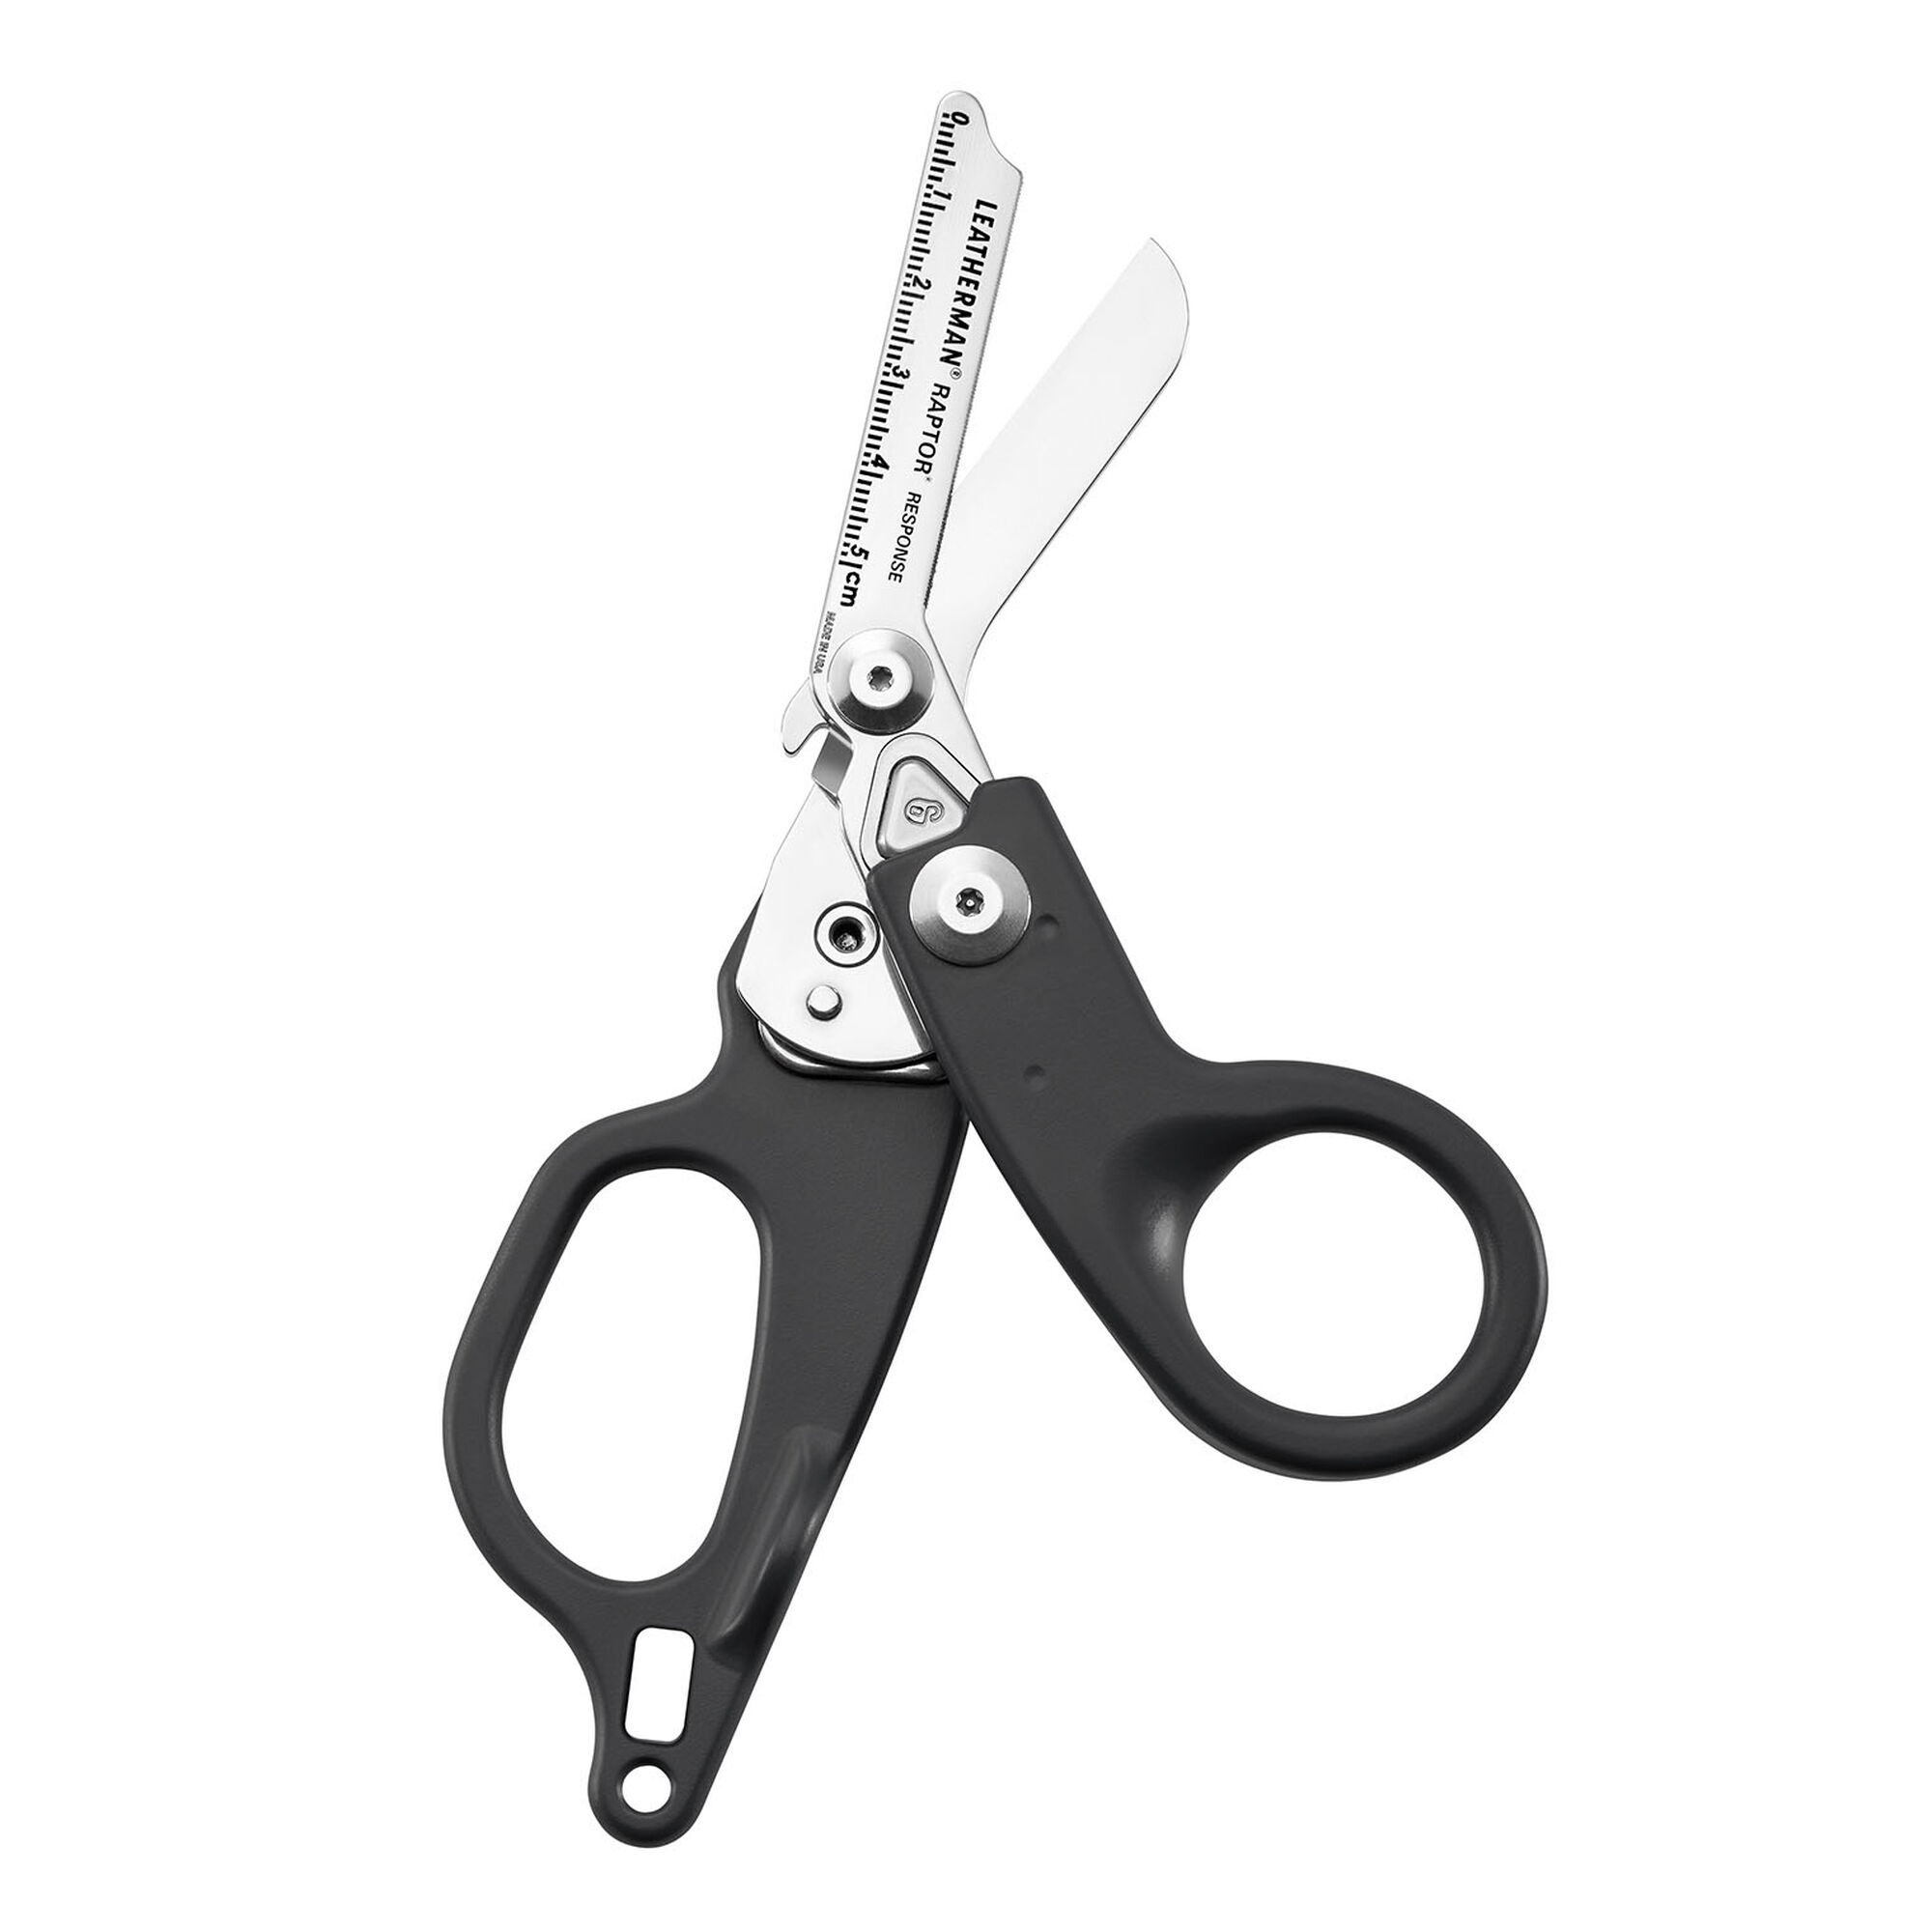 Collapsible Folding Scissors for 2.0